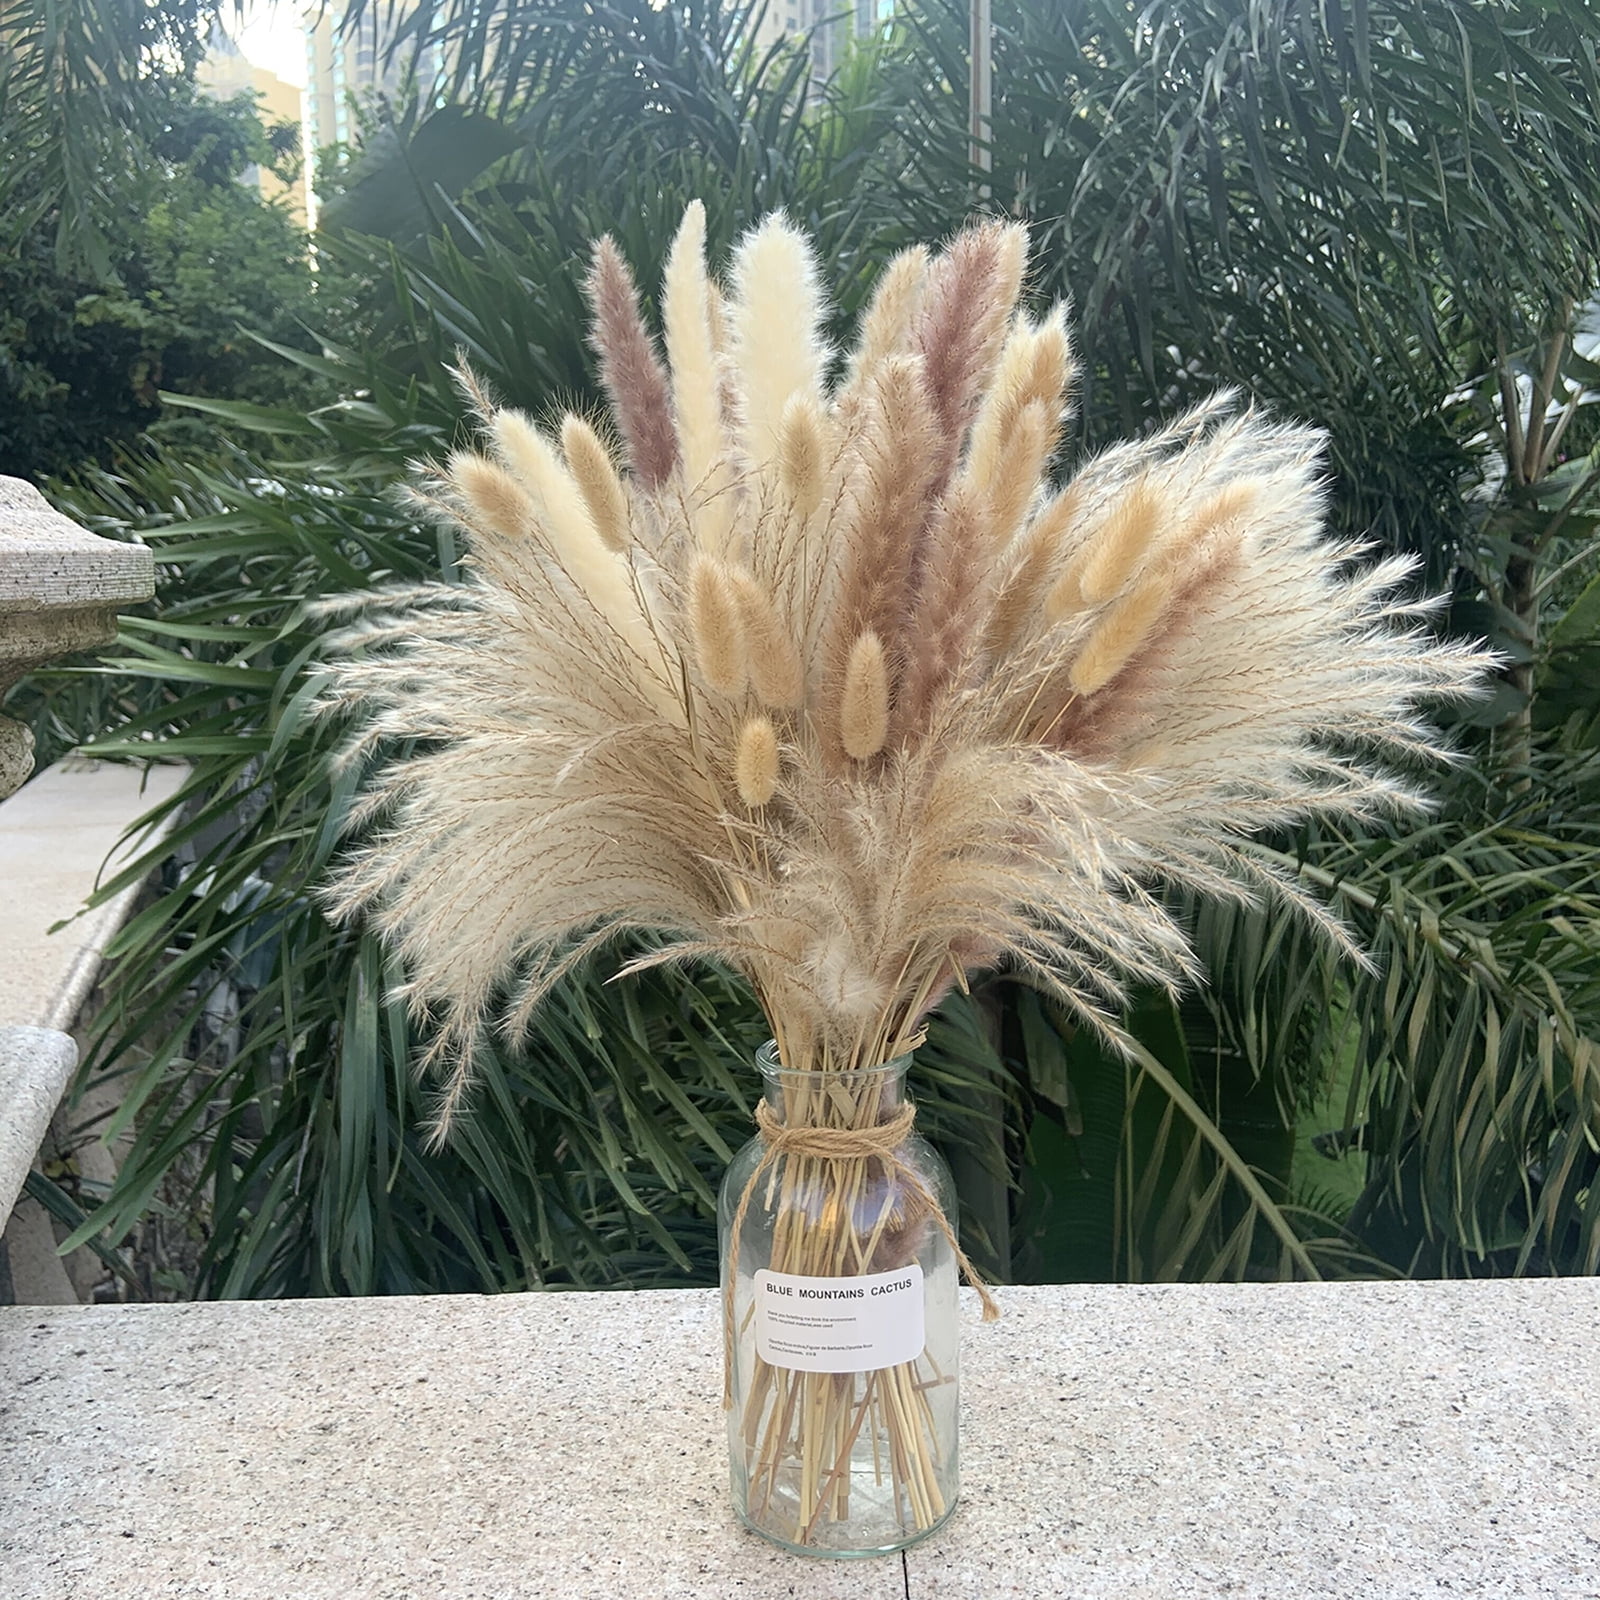 30 Natural Black Pampas Grass Stems 17 Inch Dried Fluffy Small Flowers For  Home And Wedding Pampas Grass Decor From Gabrielcoo, $16.27